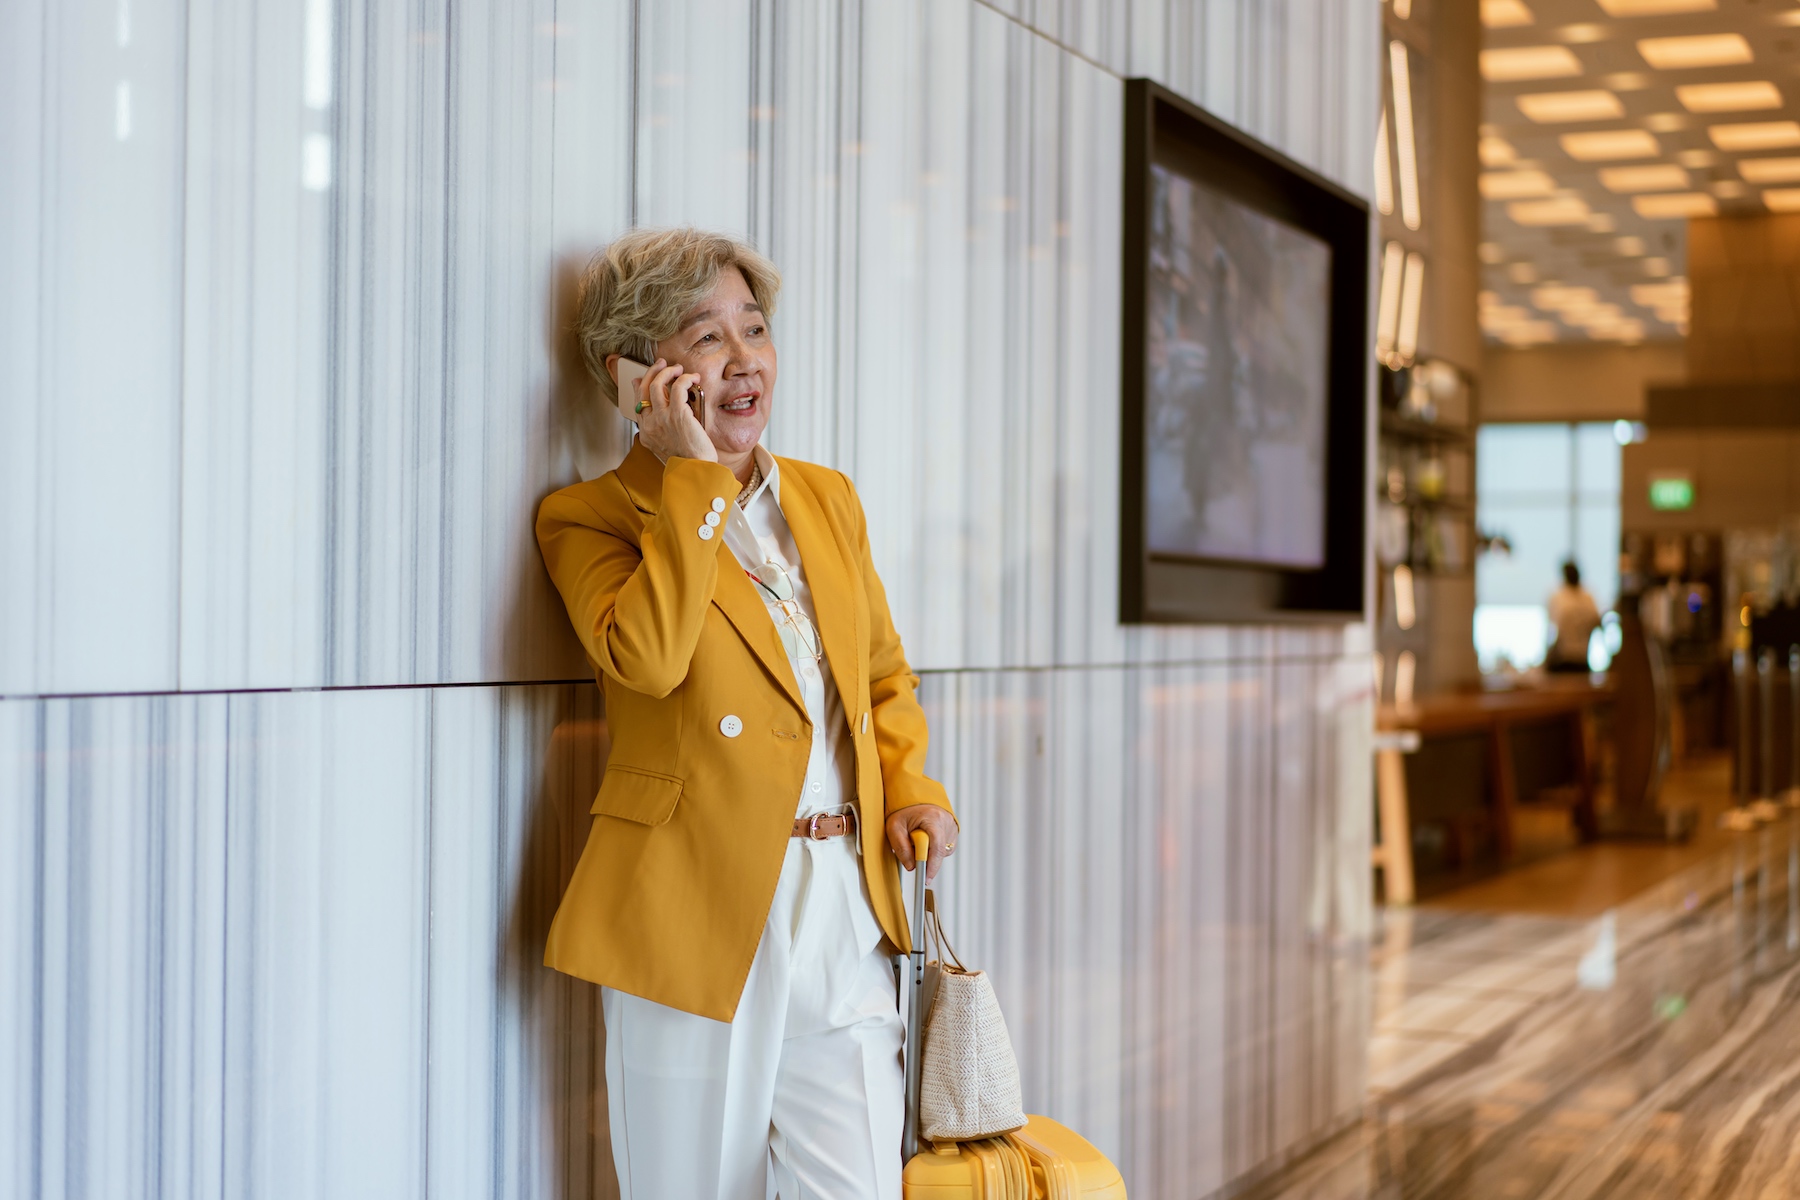 An older businesswoman waits for her flight at the airport while taking a phone call